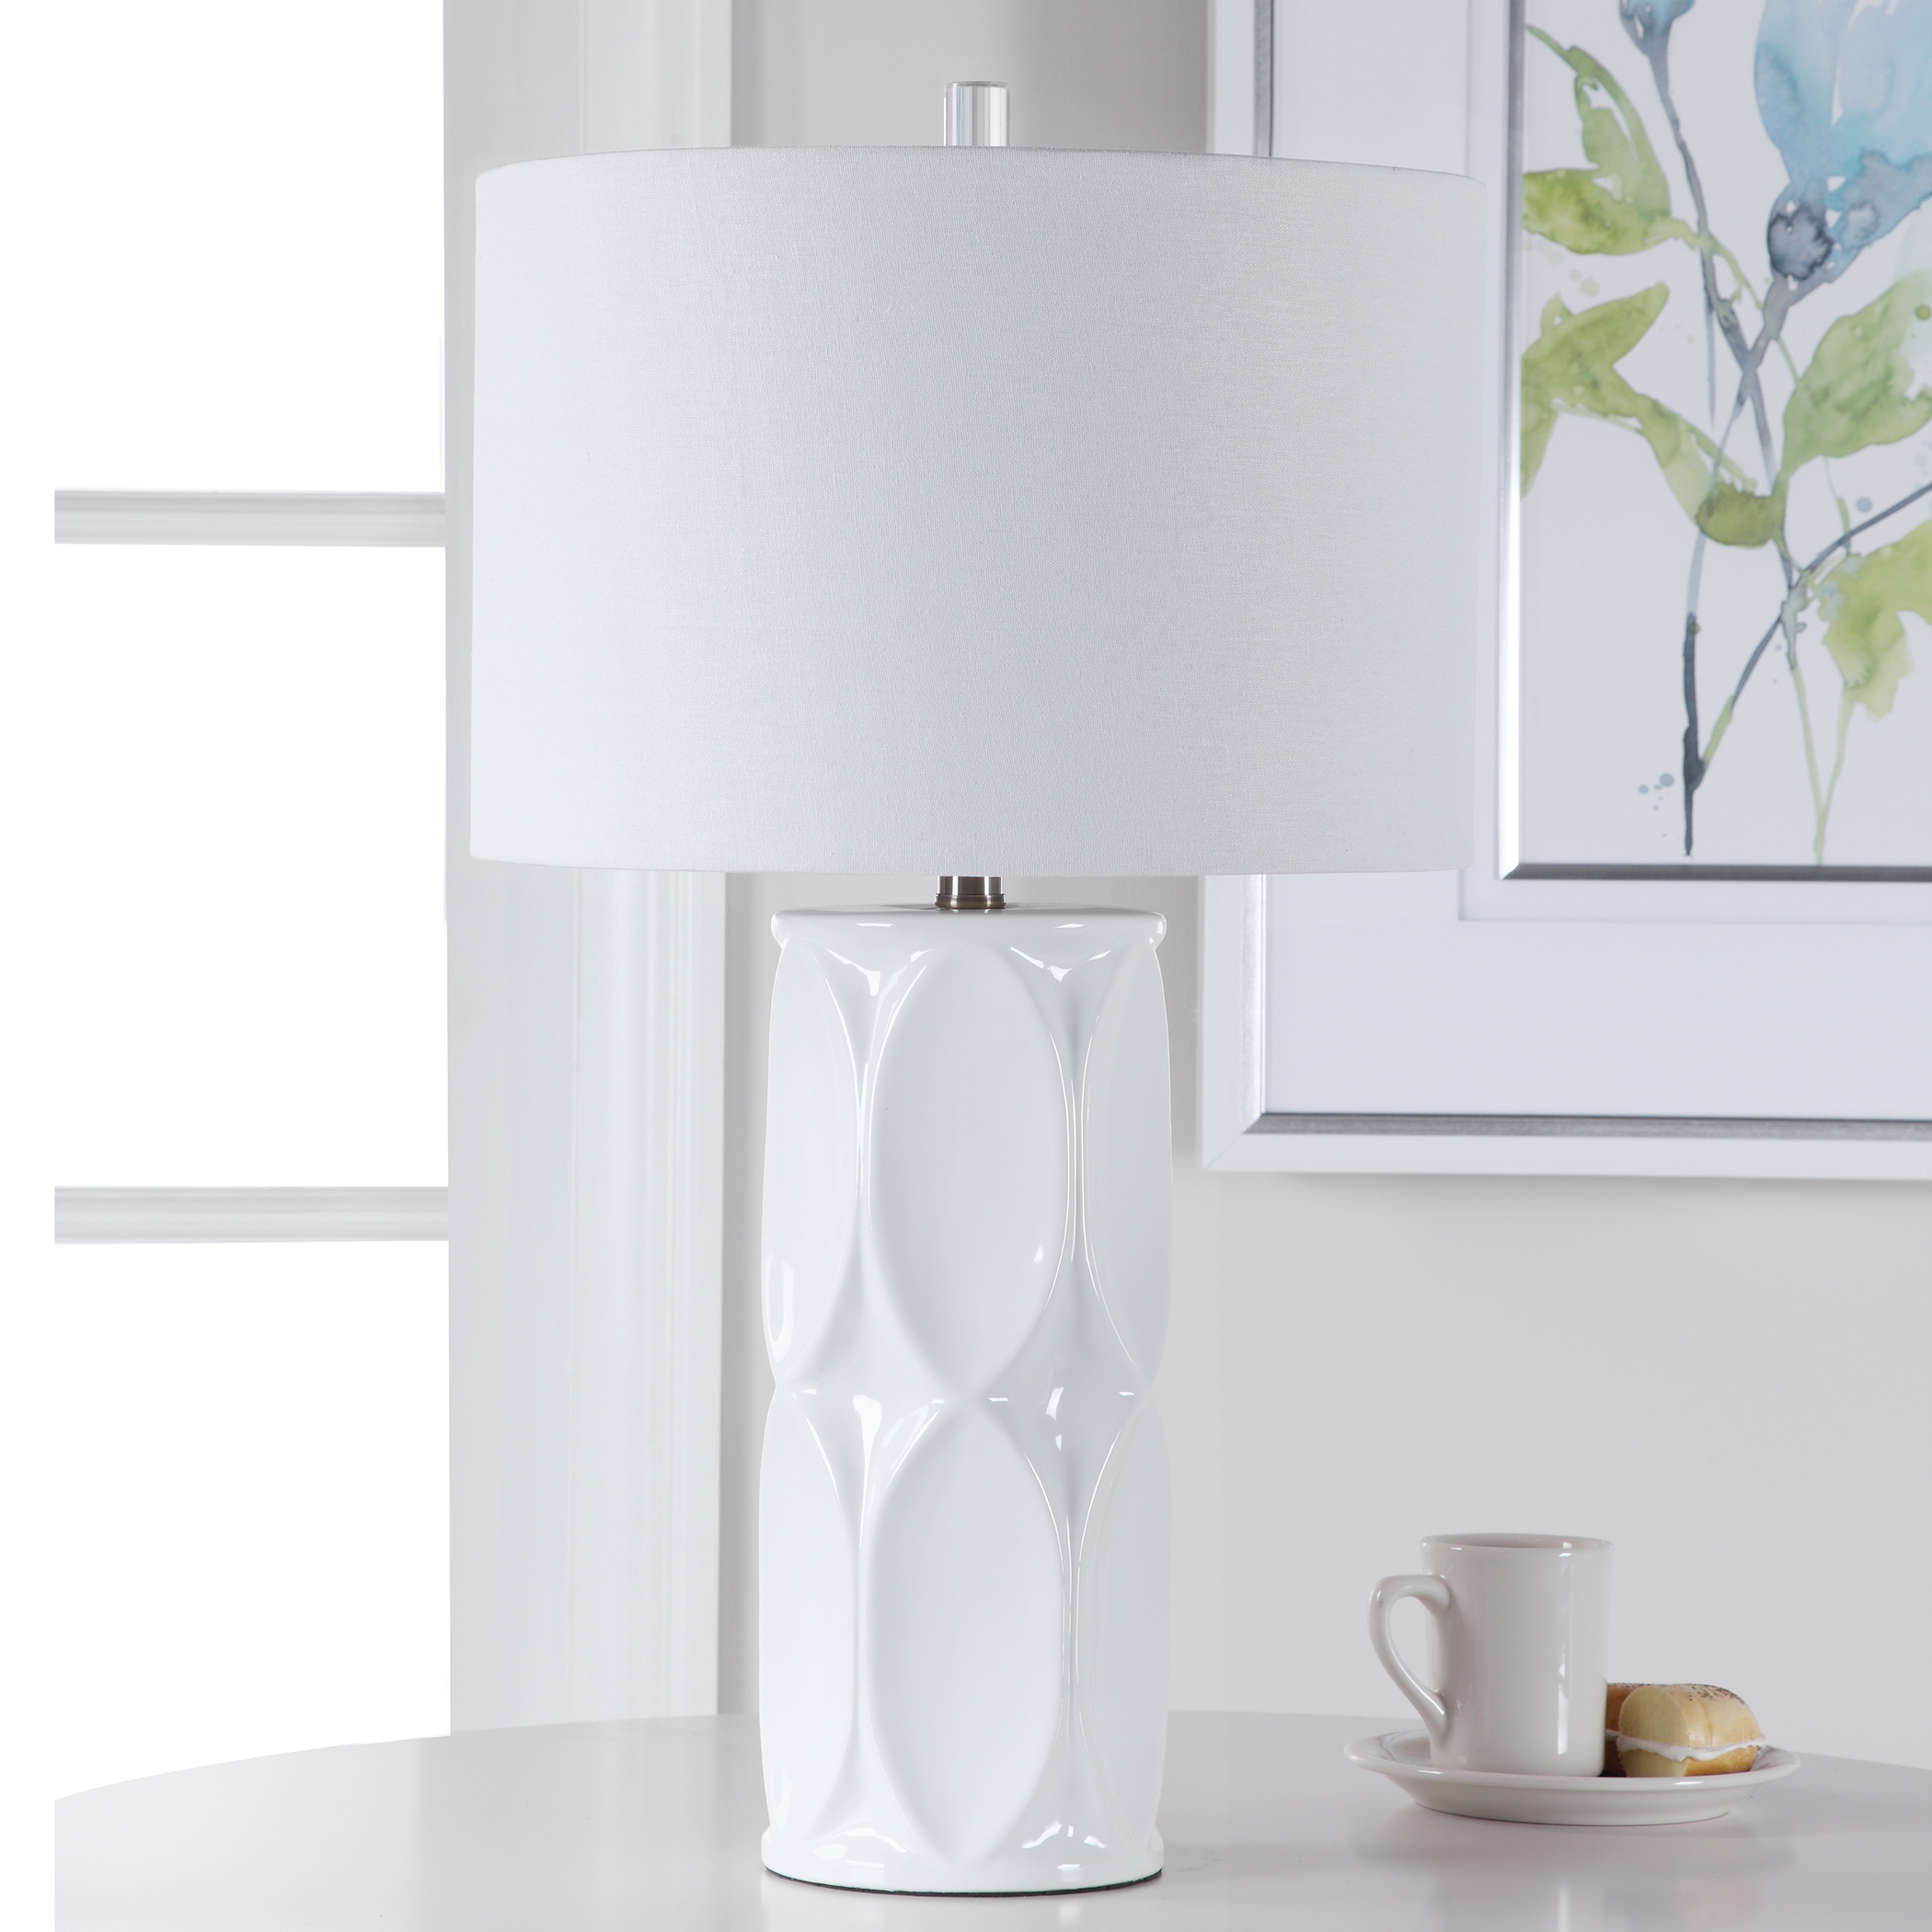 Sinclair White Table Lamp - Image 2